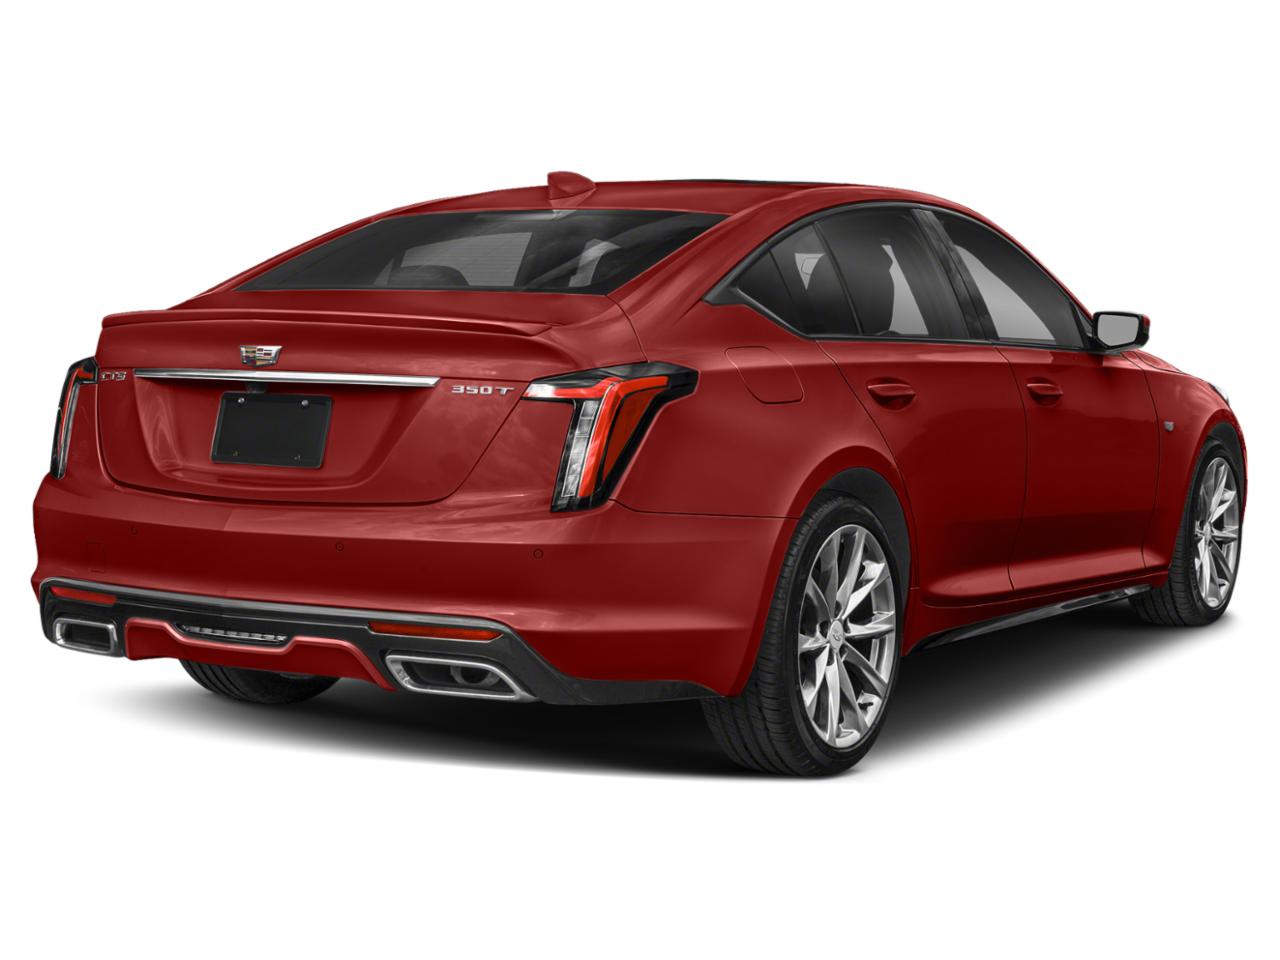 new 2021 Velocity Red 2.0L 4 cyl Turbocharged Cadillac CT5 For Sale in